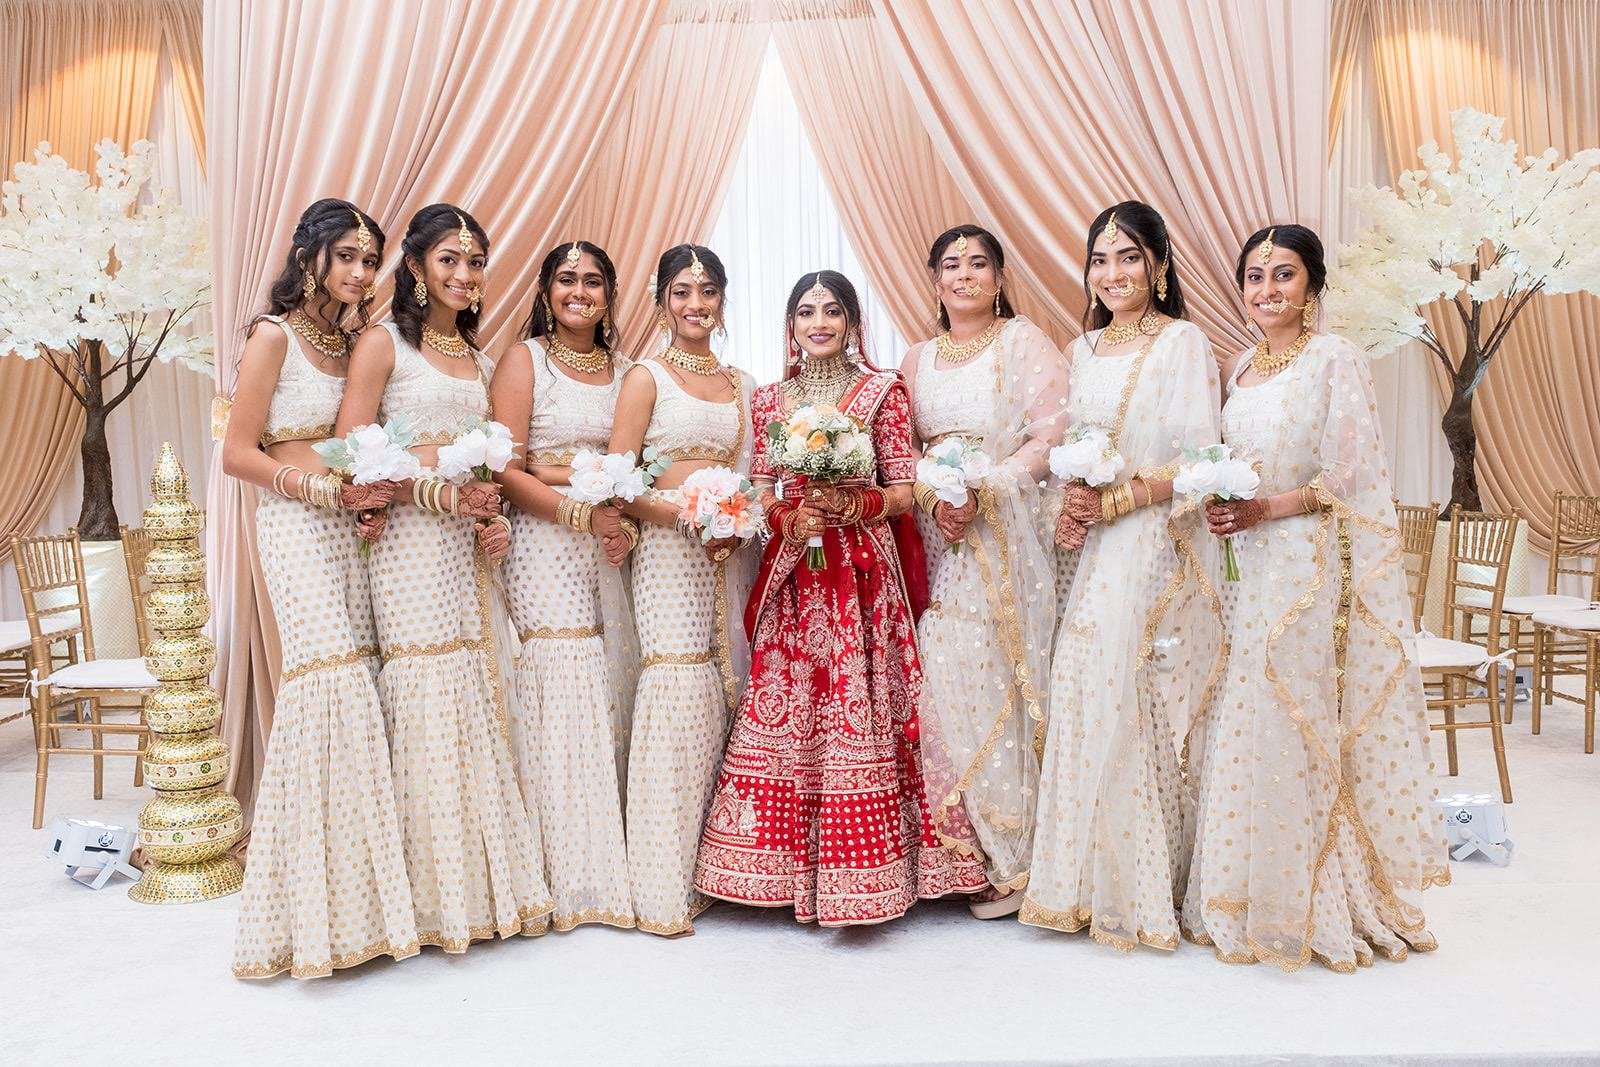 LCW - Chicago South Asian Weddings - Sonu and Daman - Portraits Ceremony-85.jpg